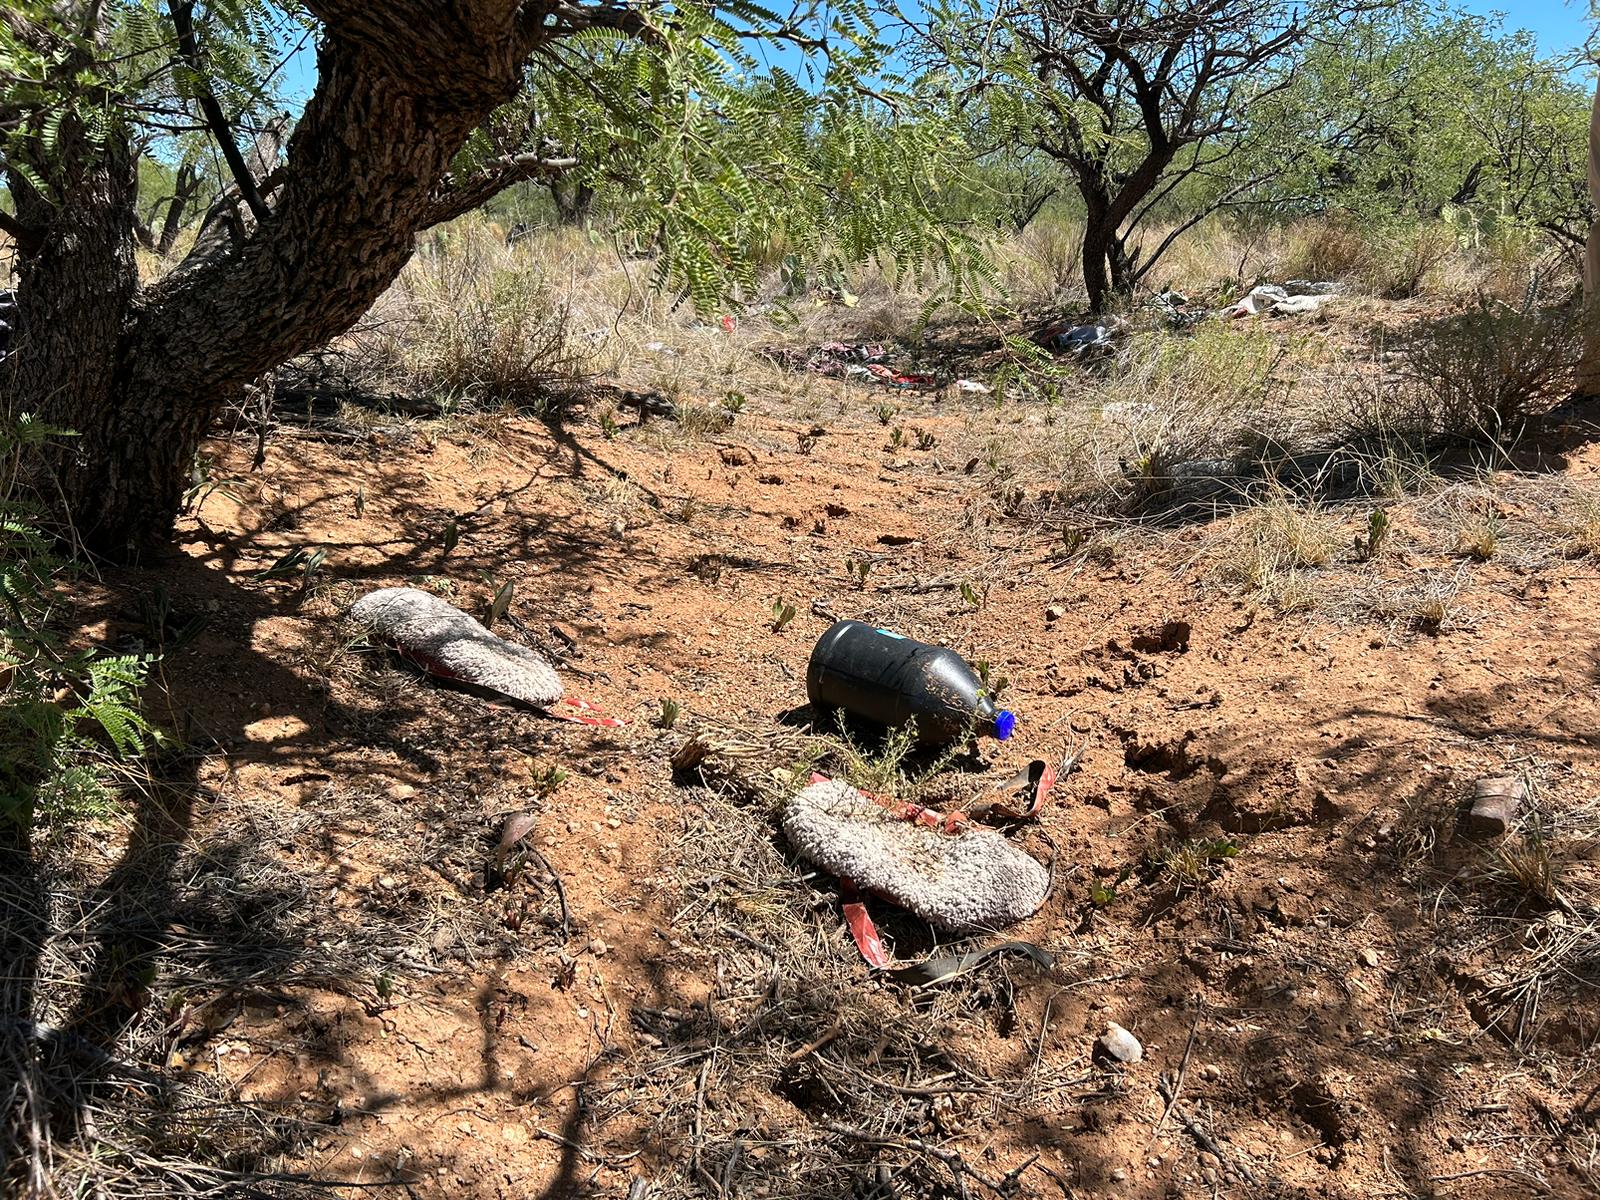 Objects left behind, such as empty water bottles, serve as evidence of the passage of many people — originating from Mexico —- across the Arizona desert in search of a better life in the U.S. (Peter Tran) 